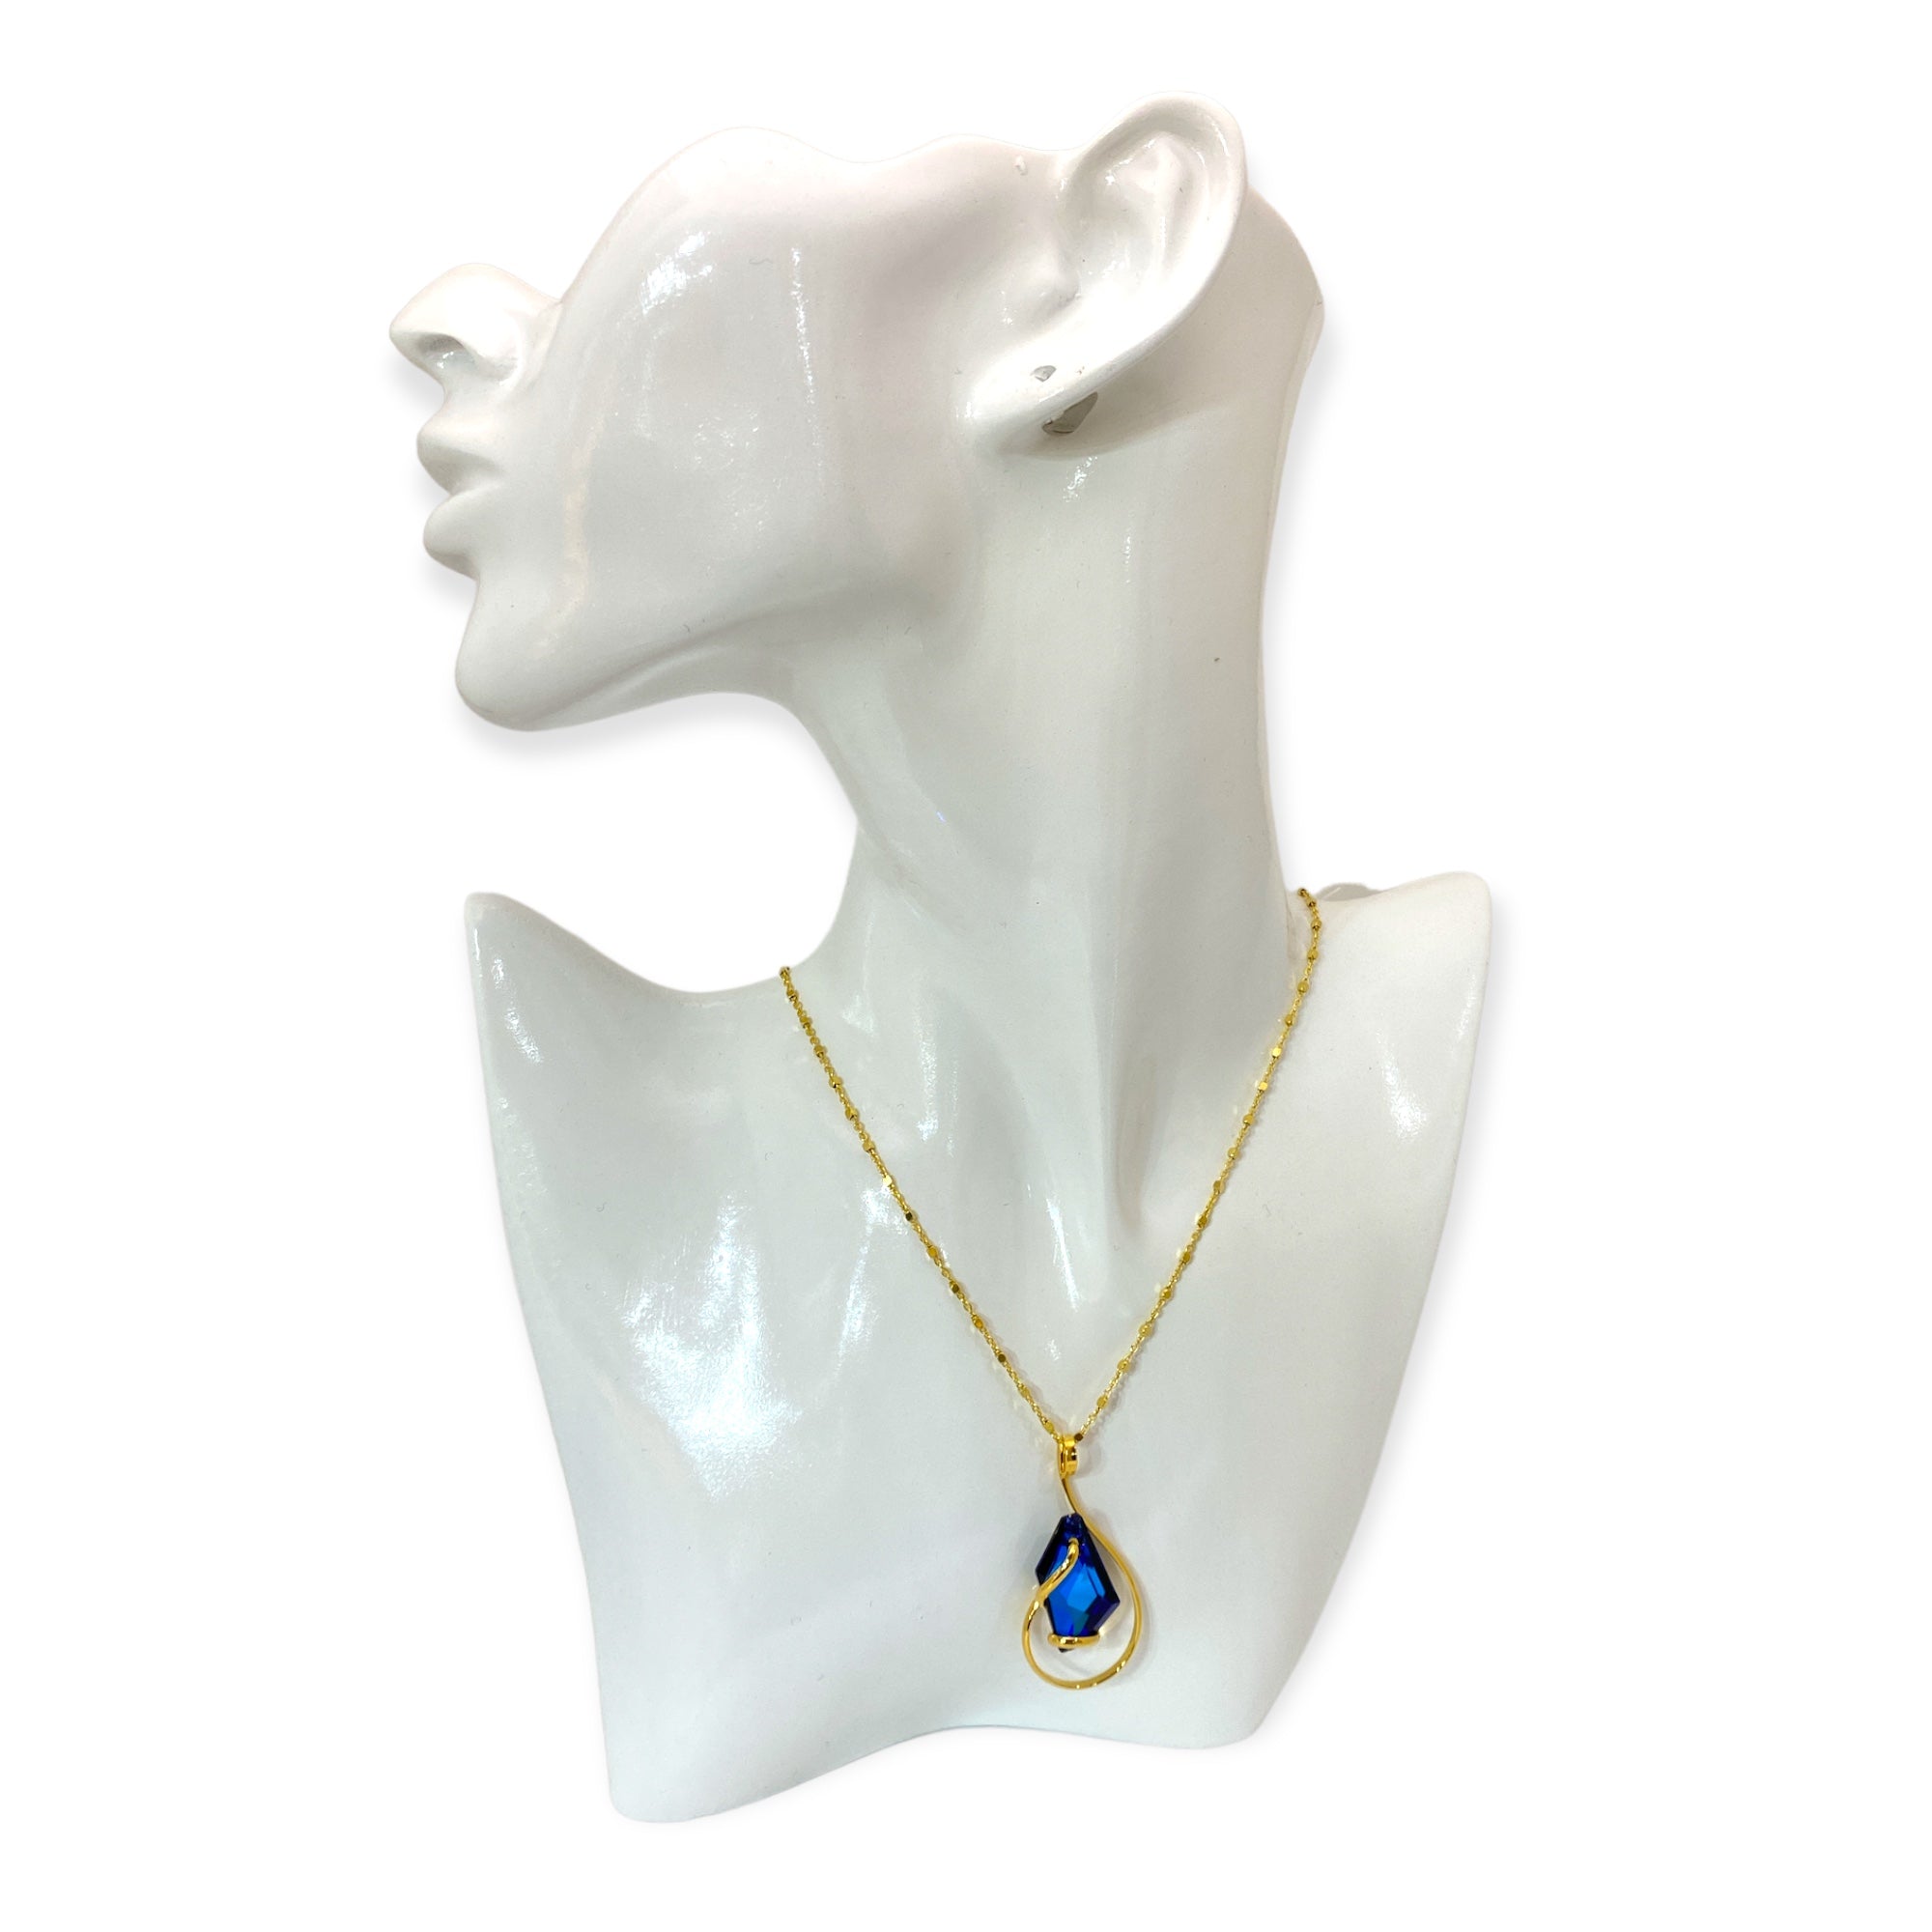 BLUE-ART SMALL NECKLACE